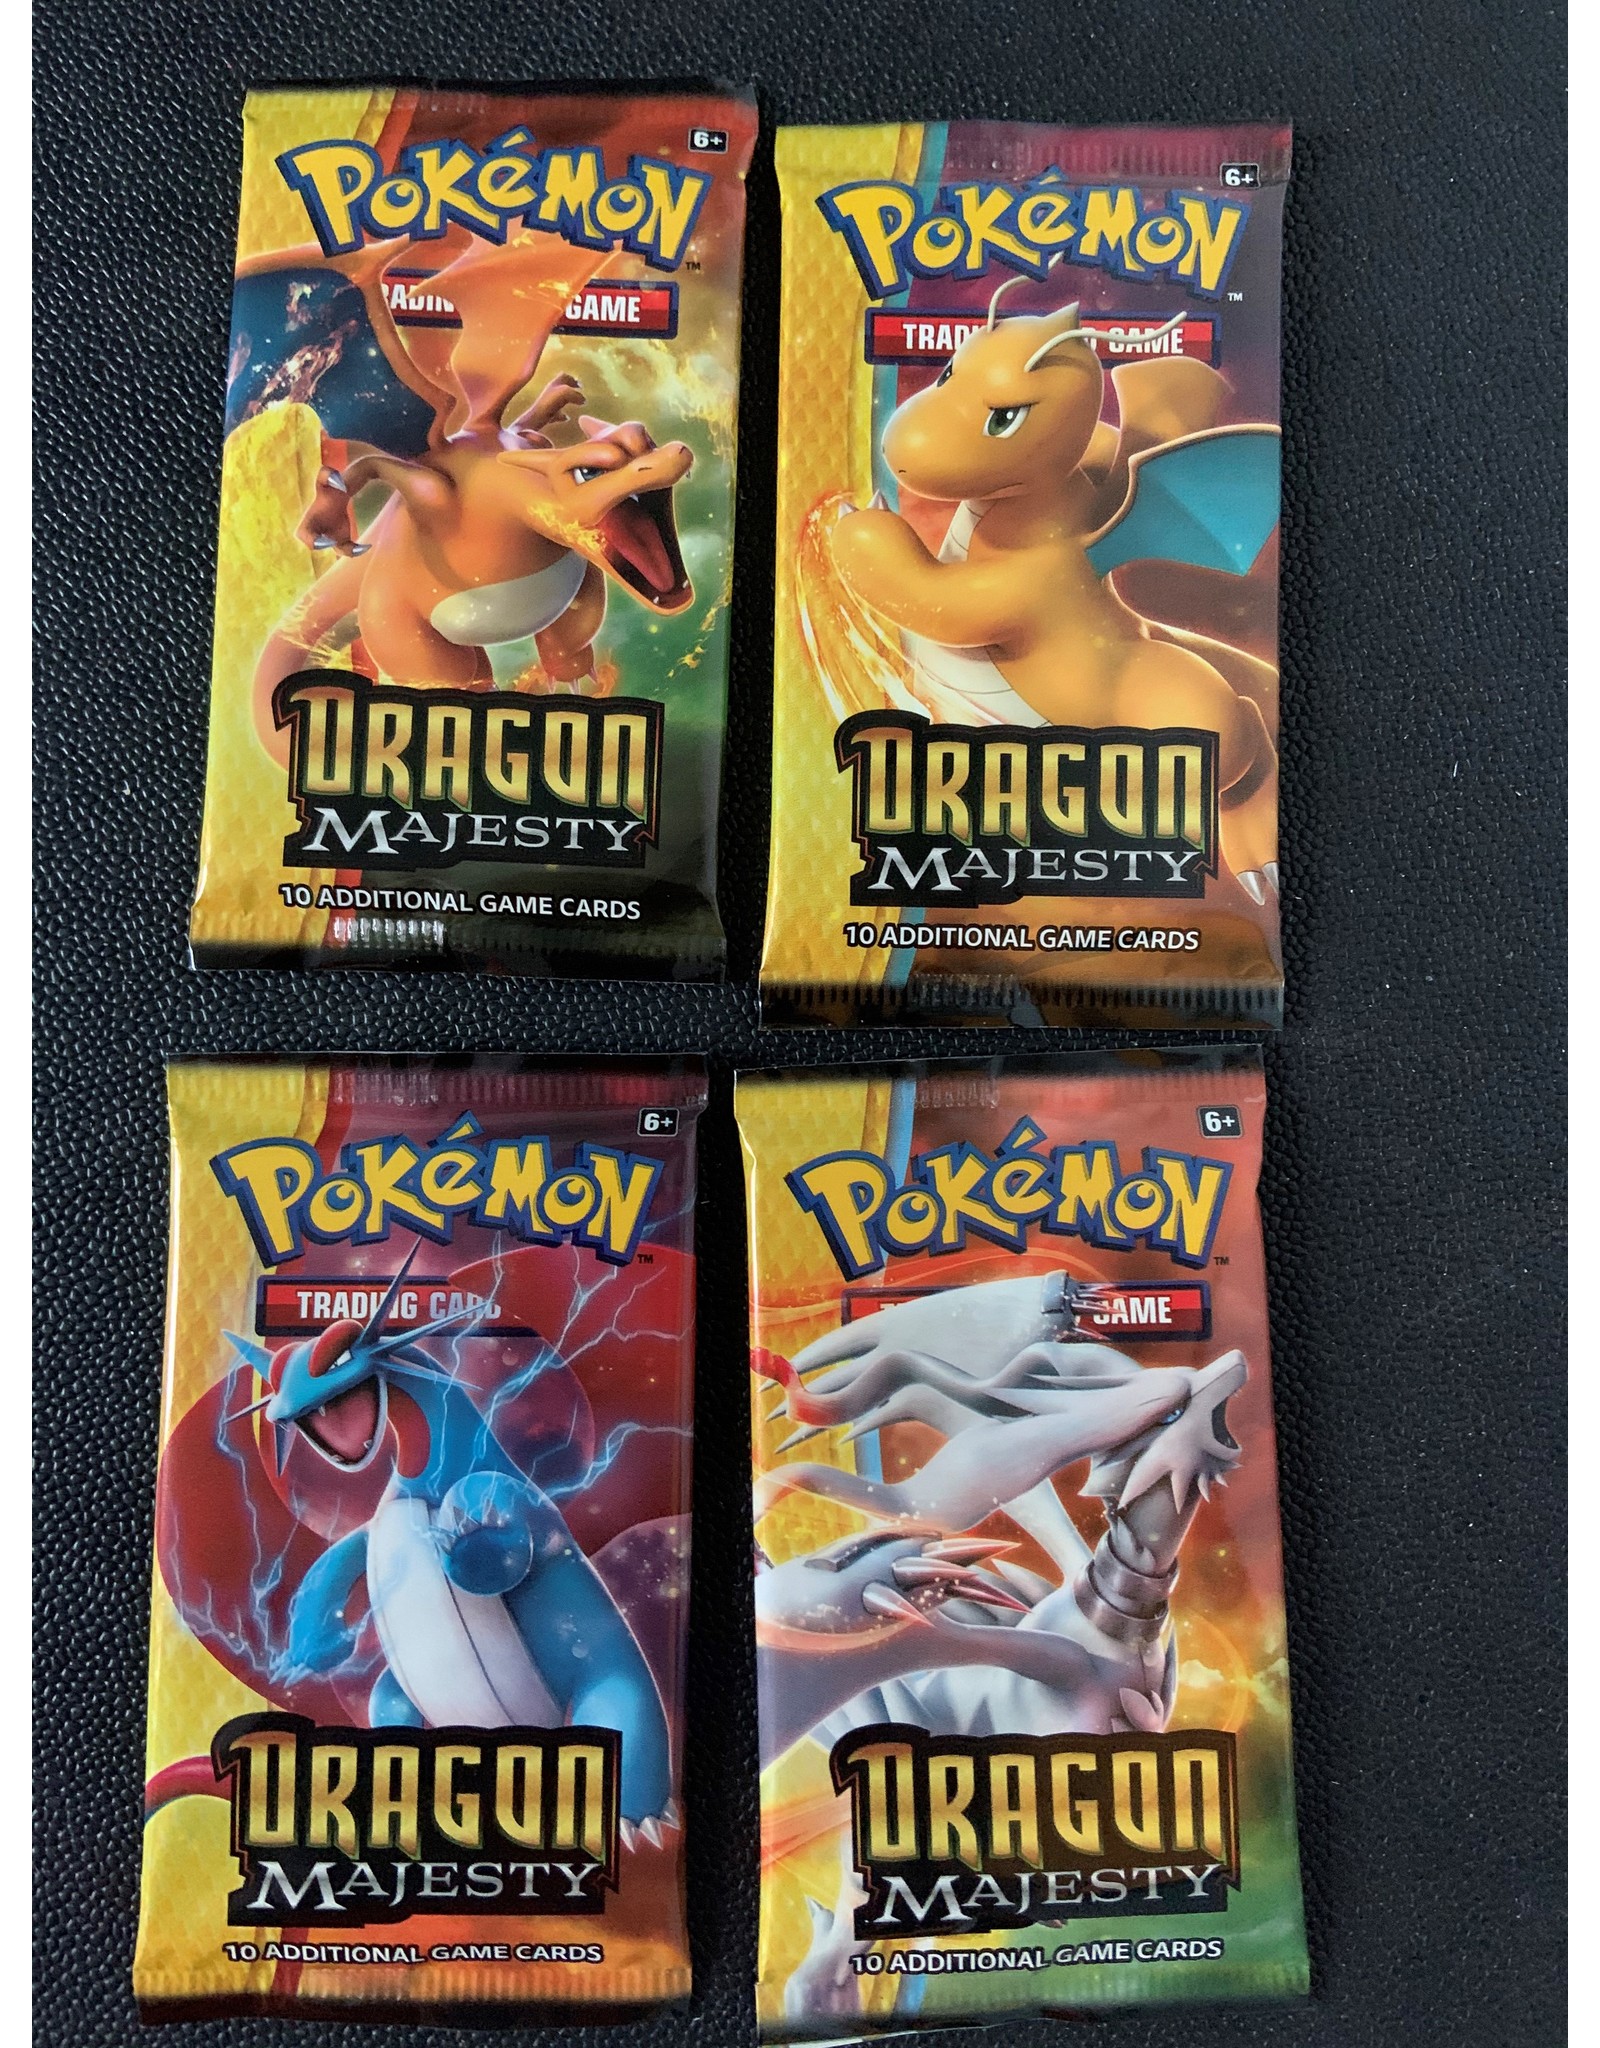 Dragon Majesty booster pack